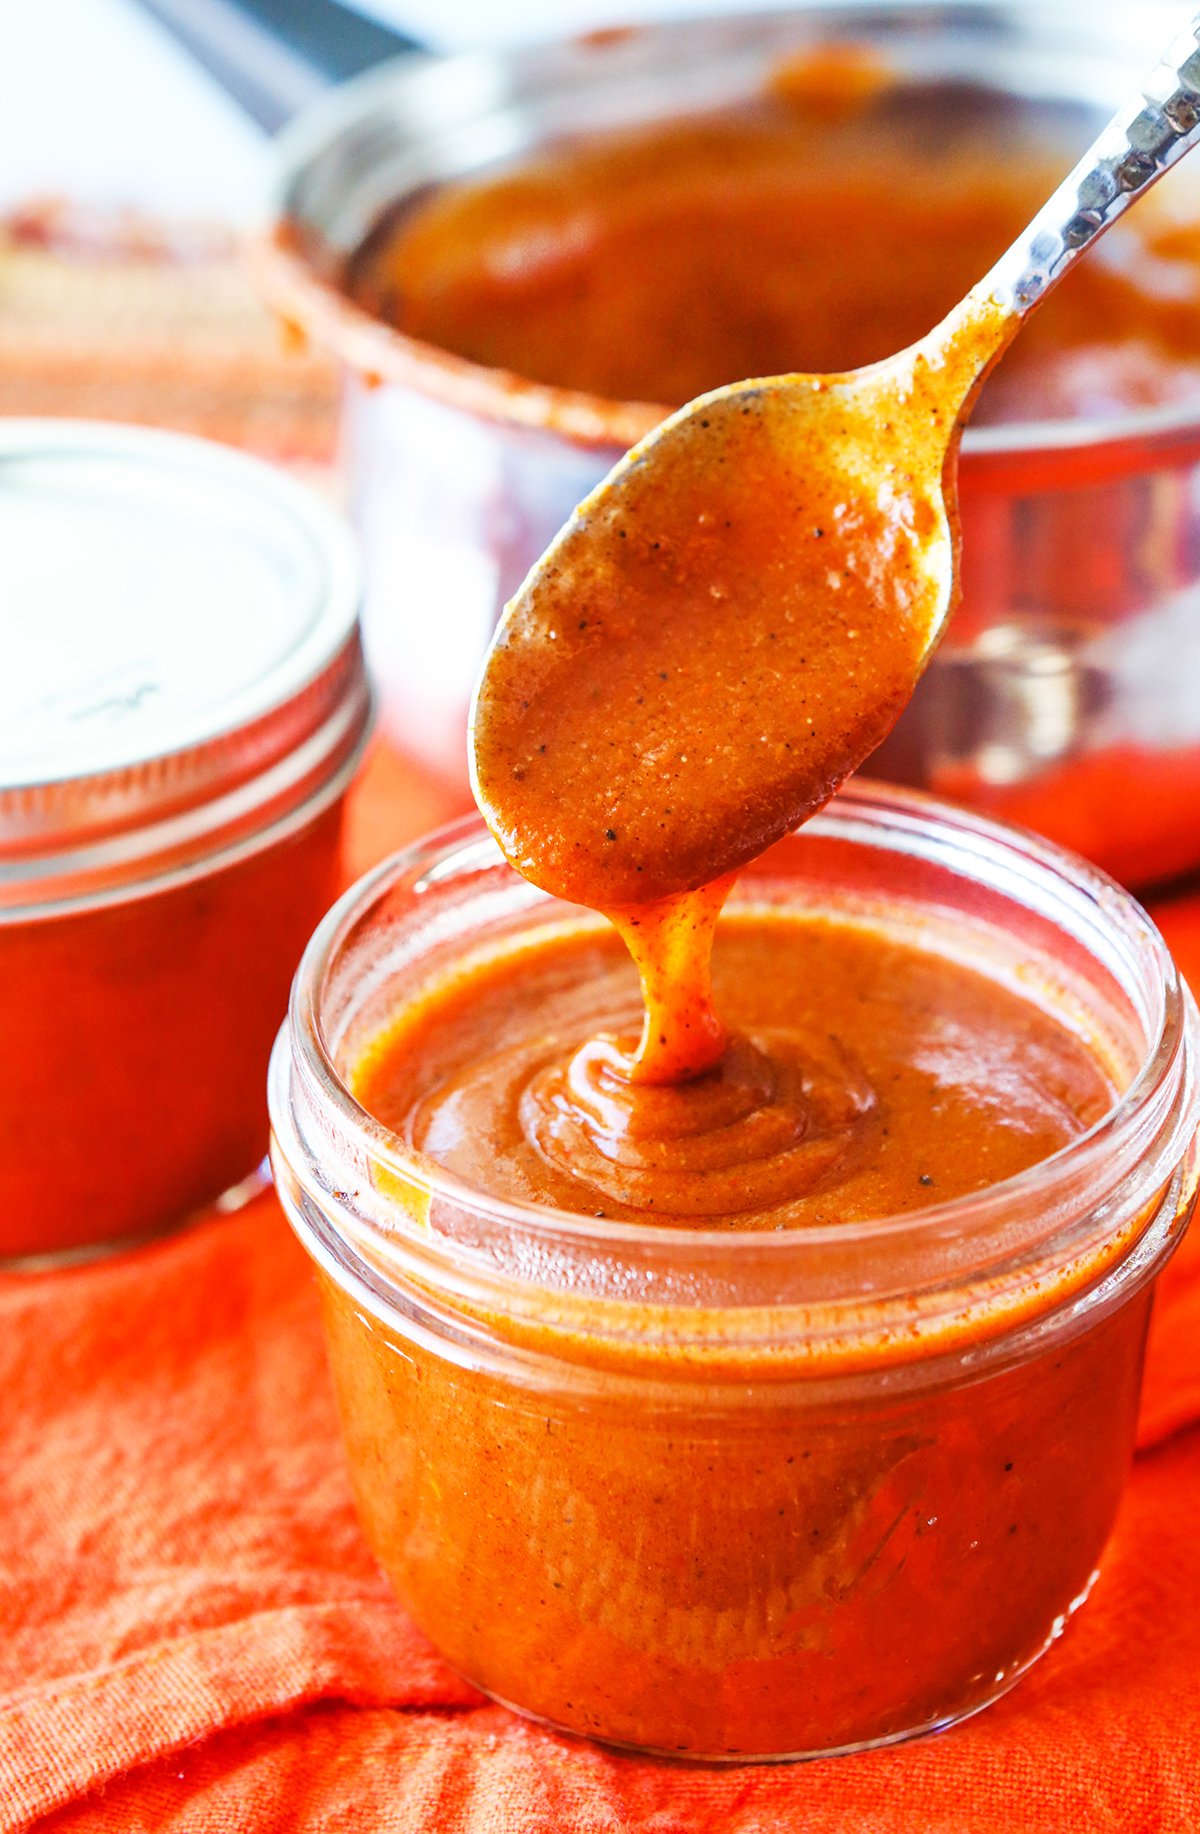 Enchilada sauce drizzling off a spoon into a jar filled with the red sauce.